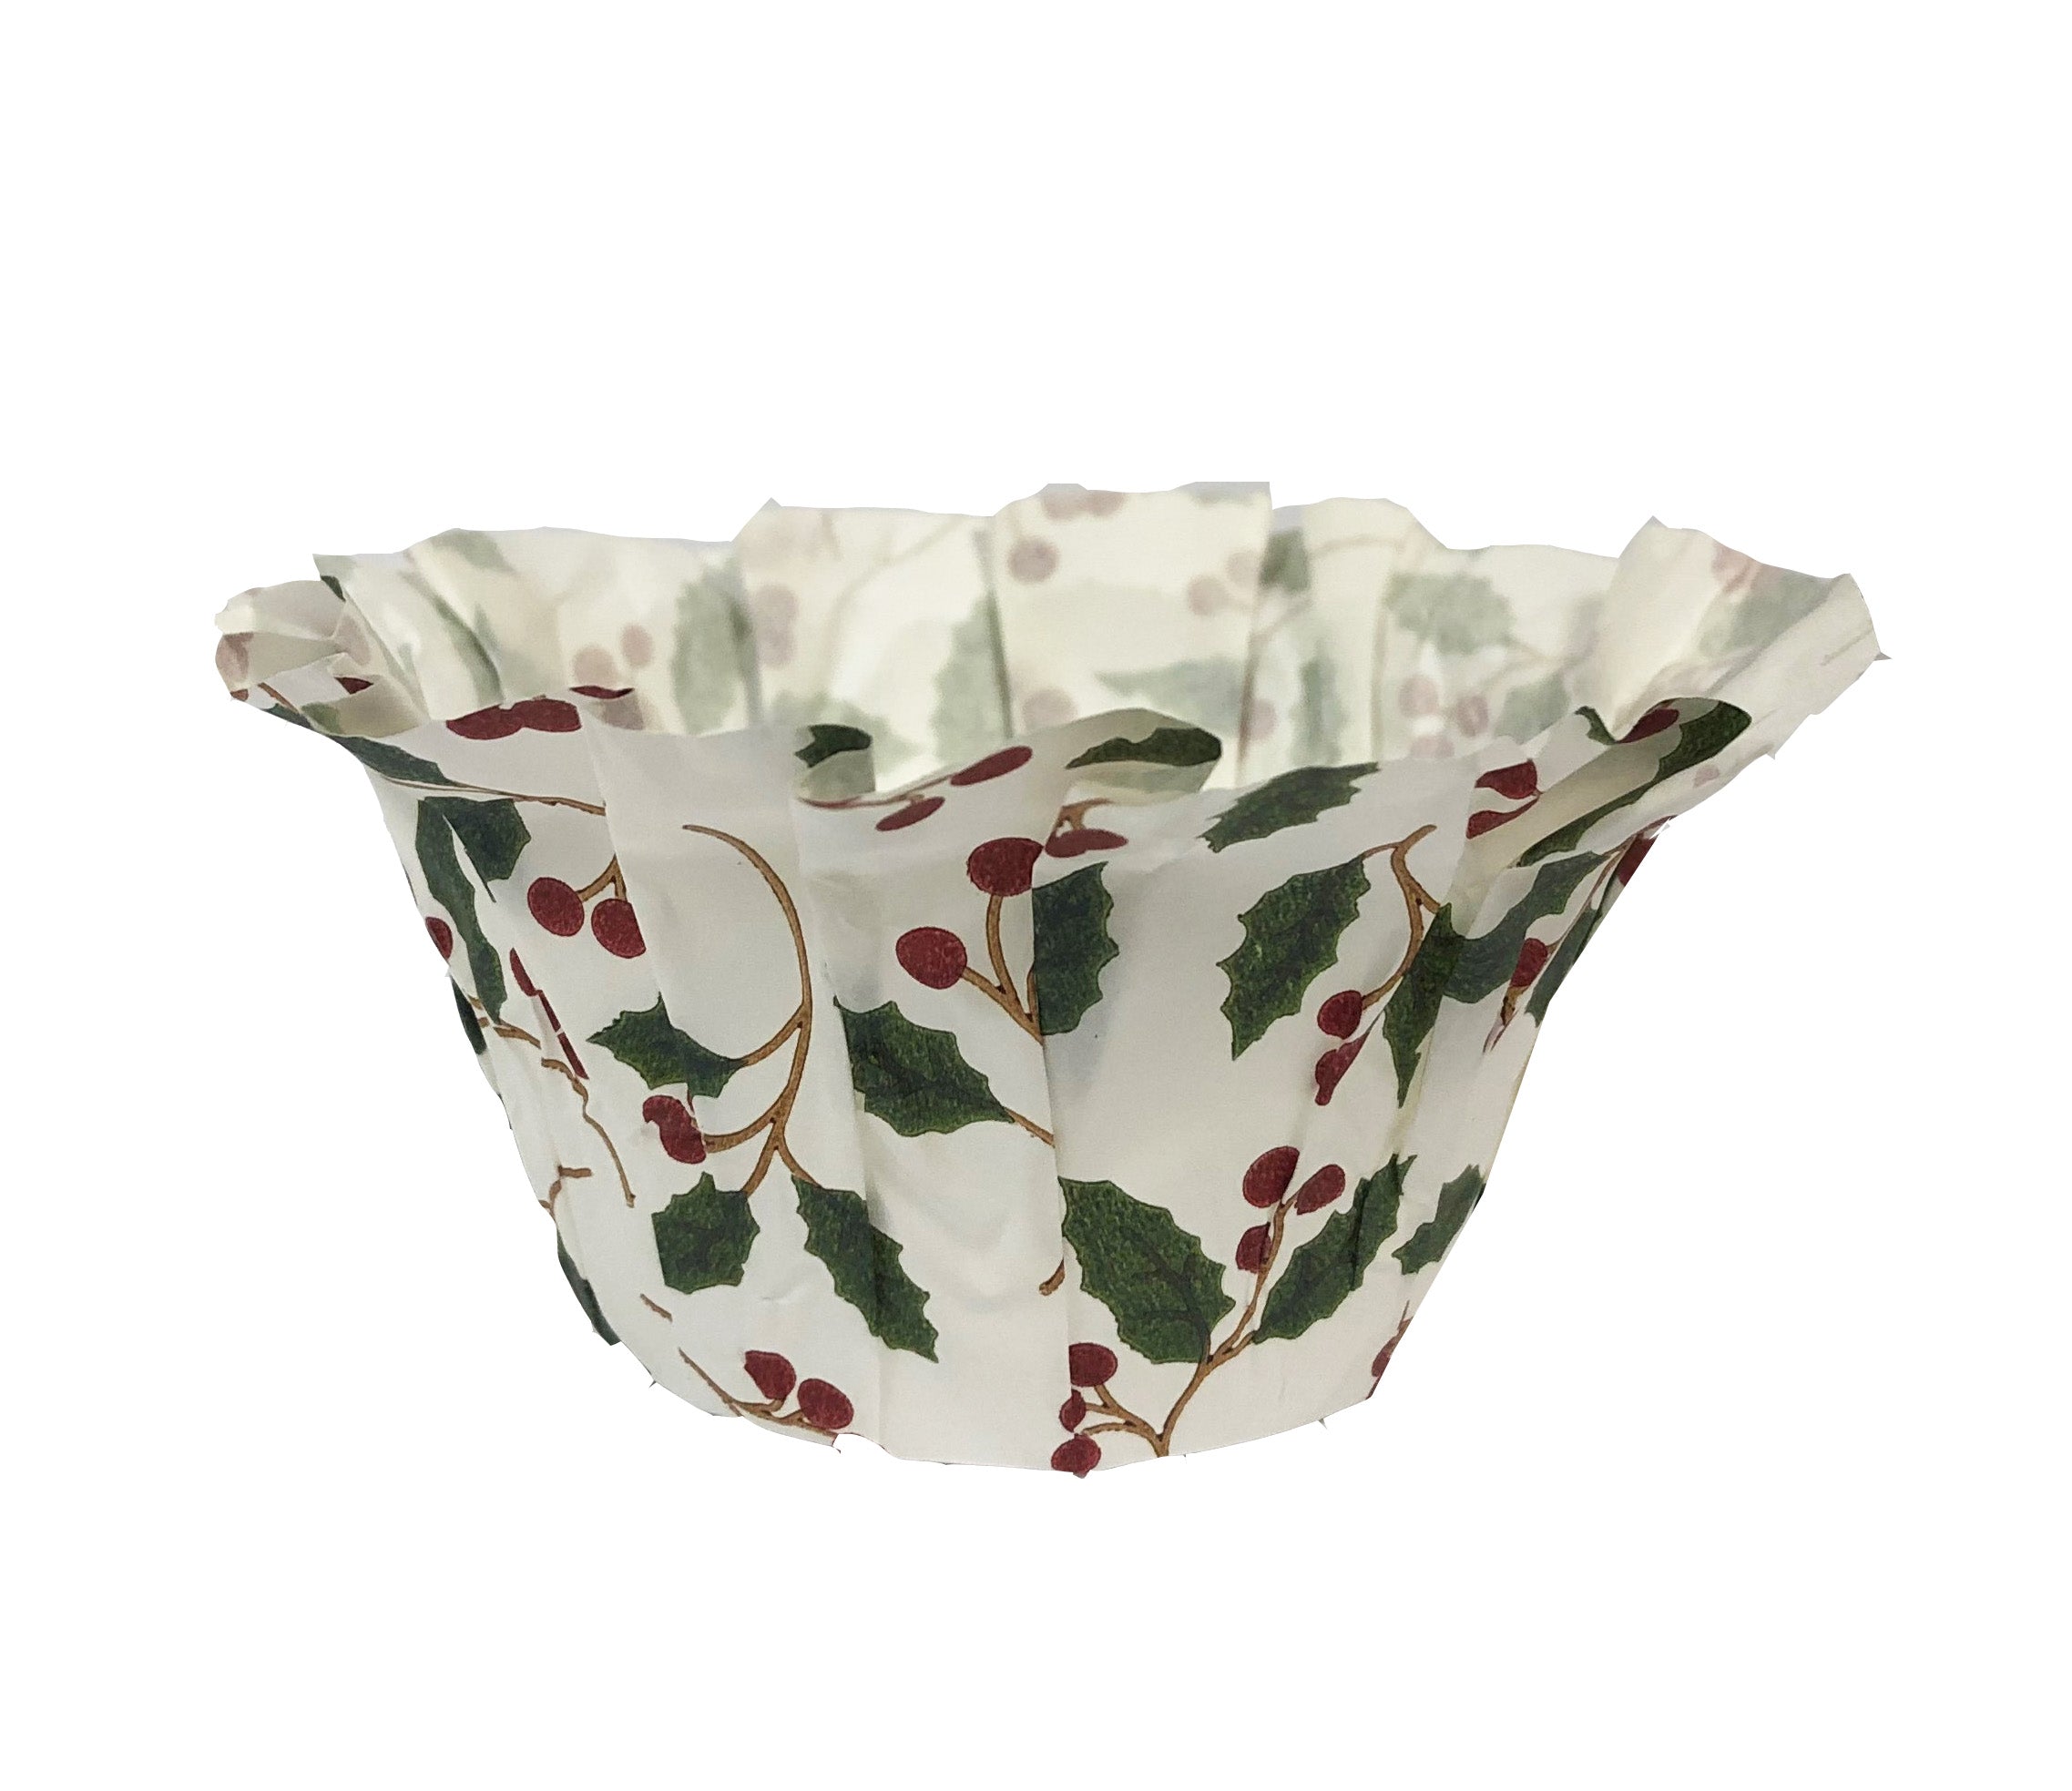 Muffin Baskets, TG0055 - Welcome Home Brands